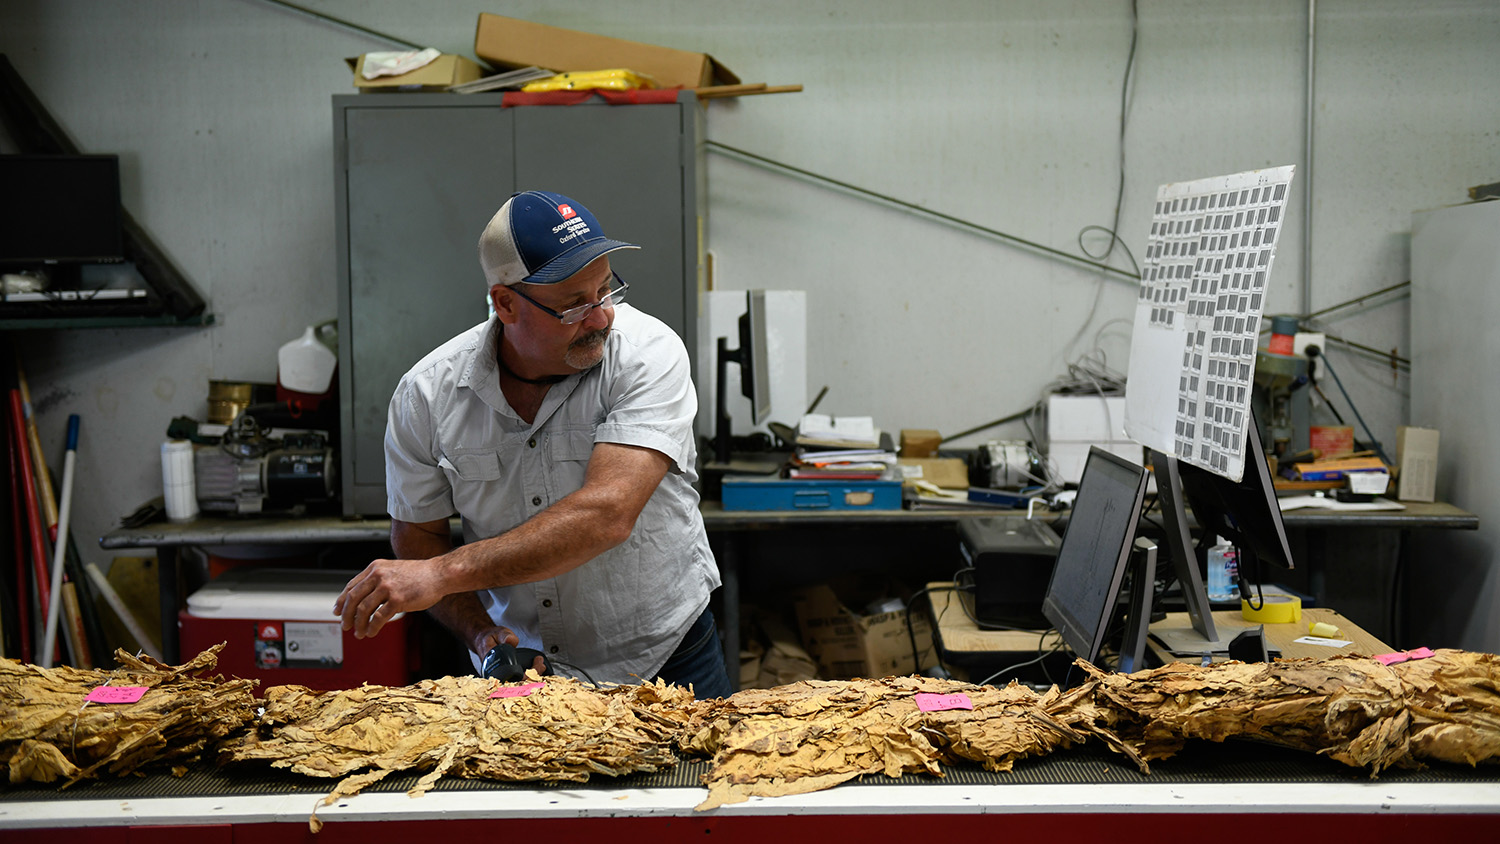 Researcher working on tobacco in Oxford Tobacco Research Station